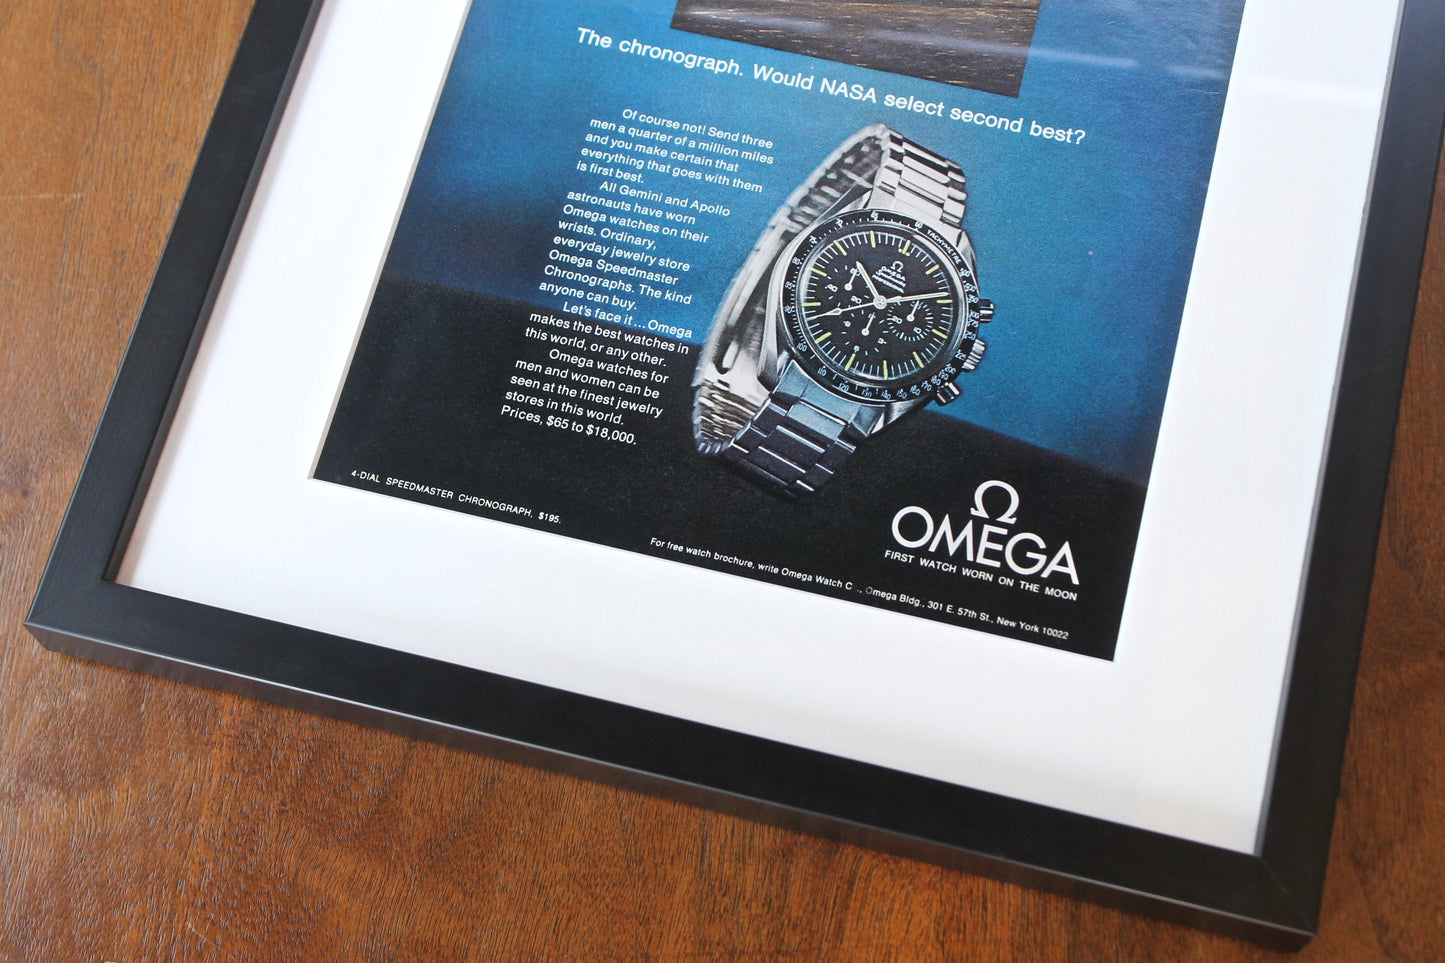 Omega Speedmaster Professional 'Would NASA Select Second Best?'